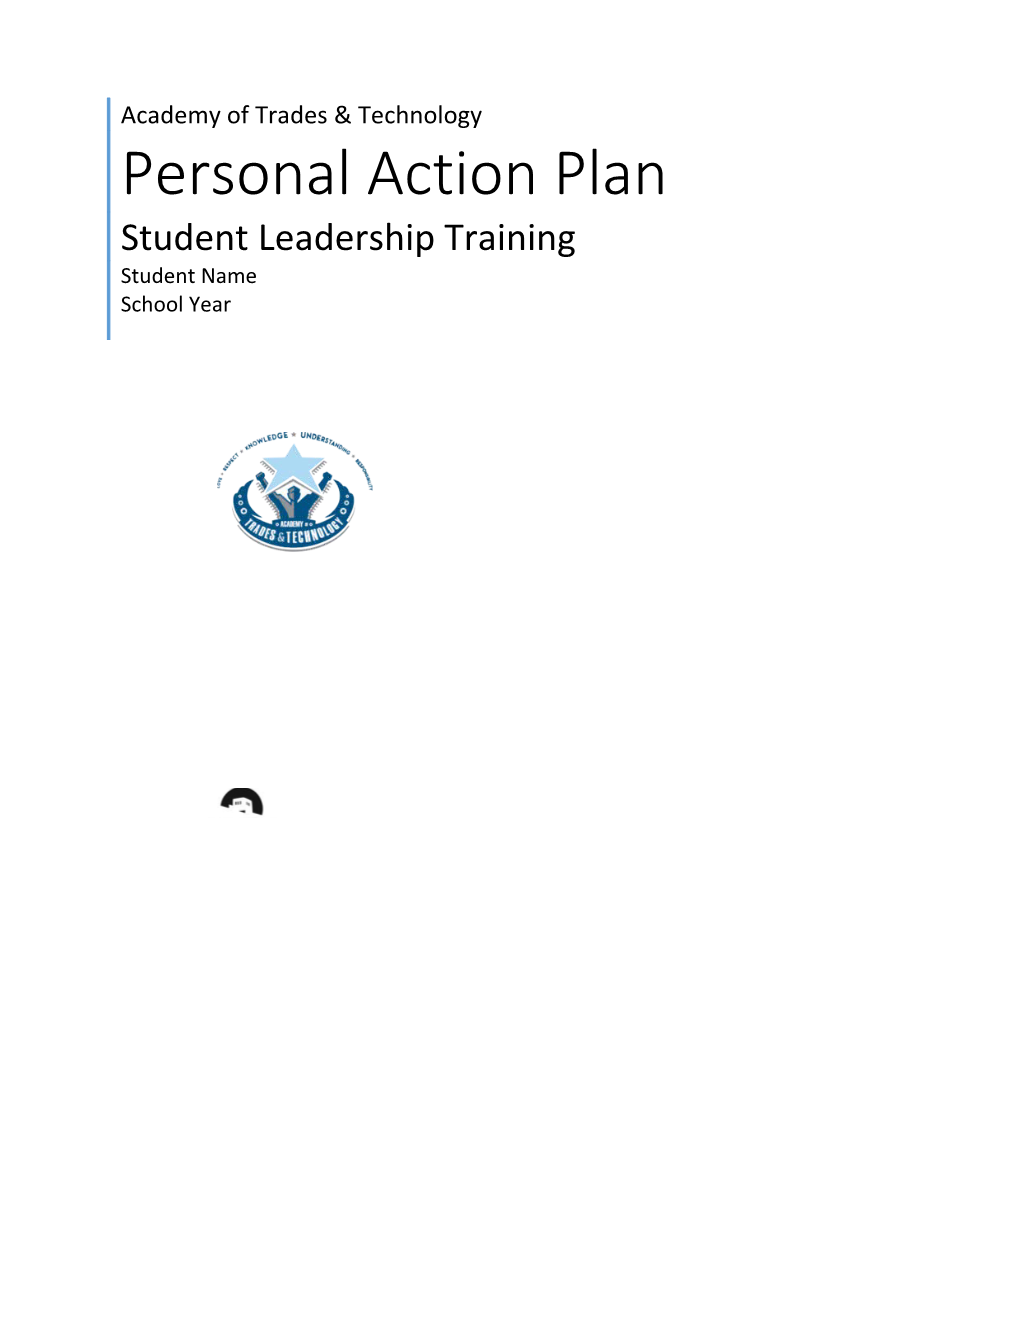 Personal Action Plan